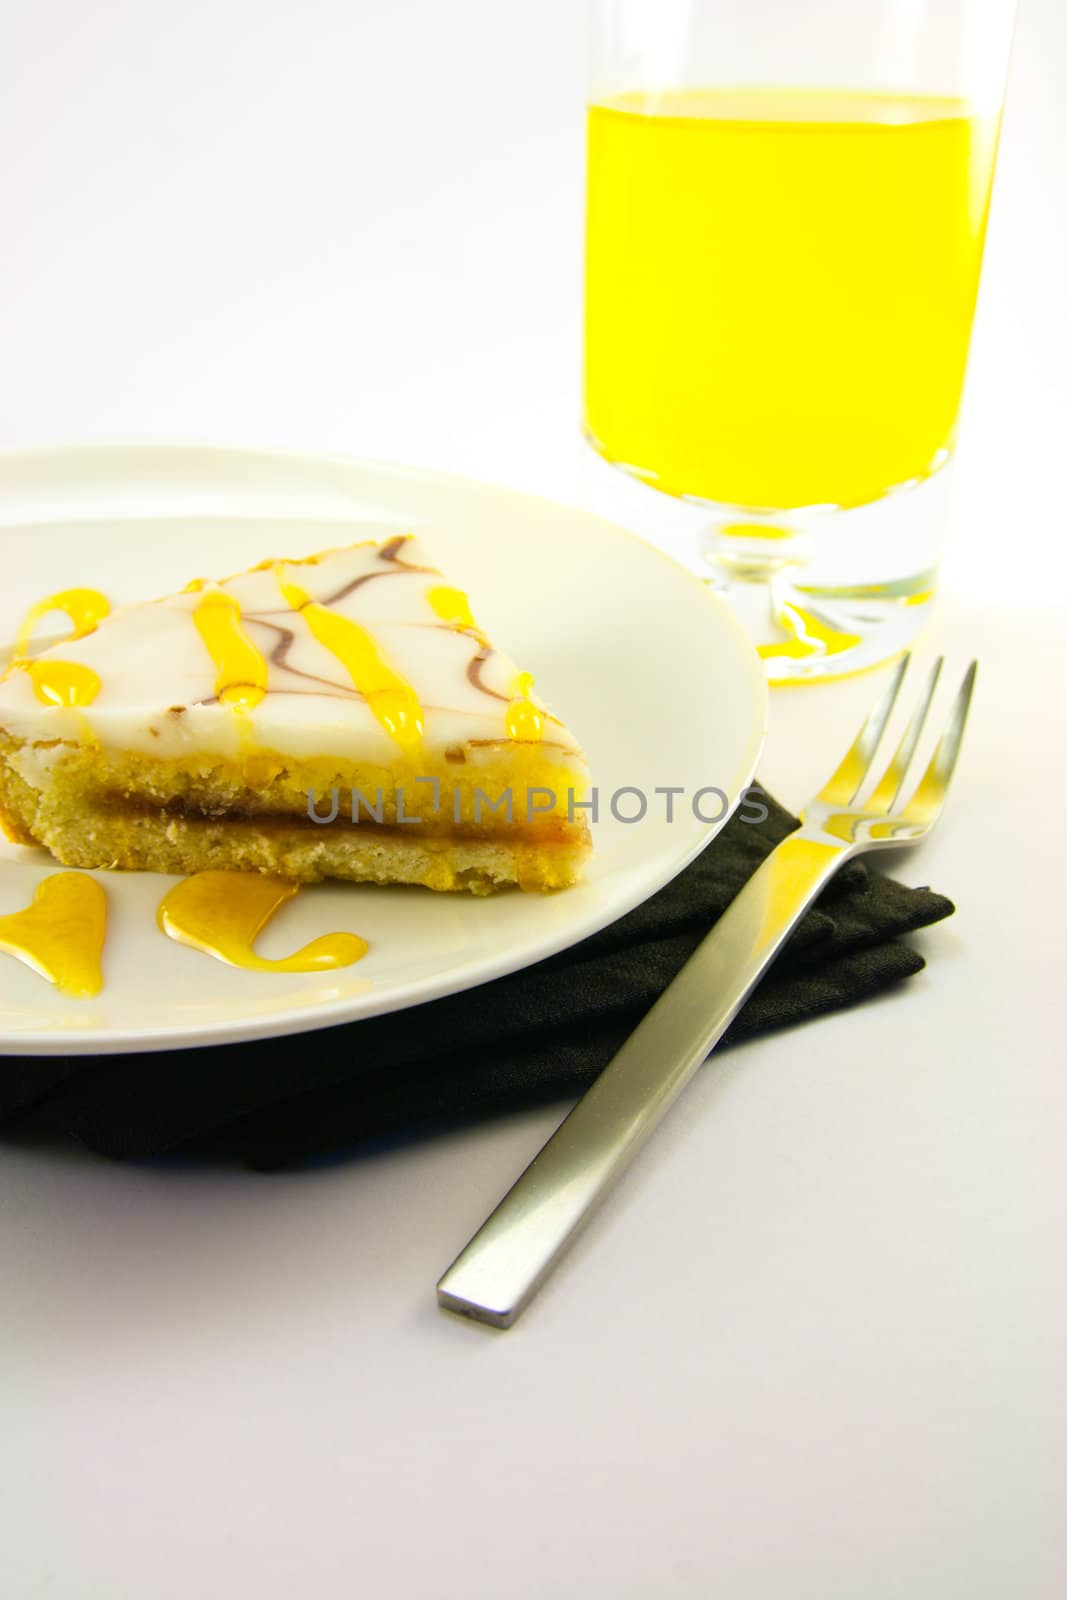 delicious looking iced bakewell tart on a black plate with a treacle drizzle and a fork on a plain background